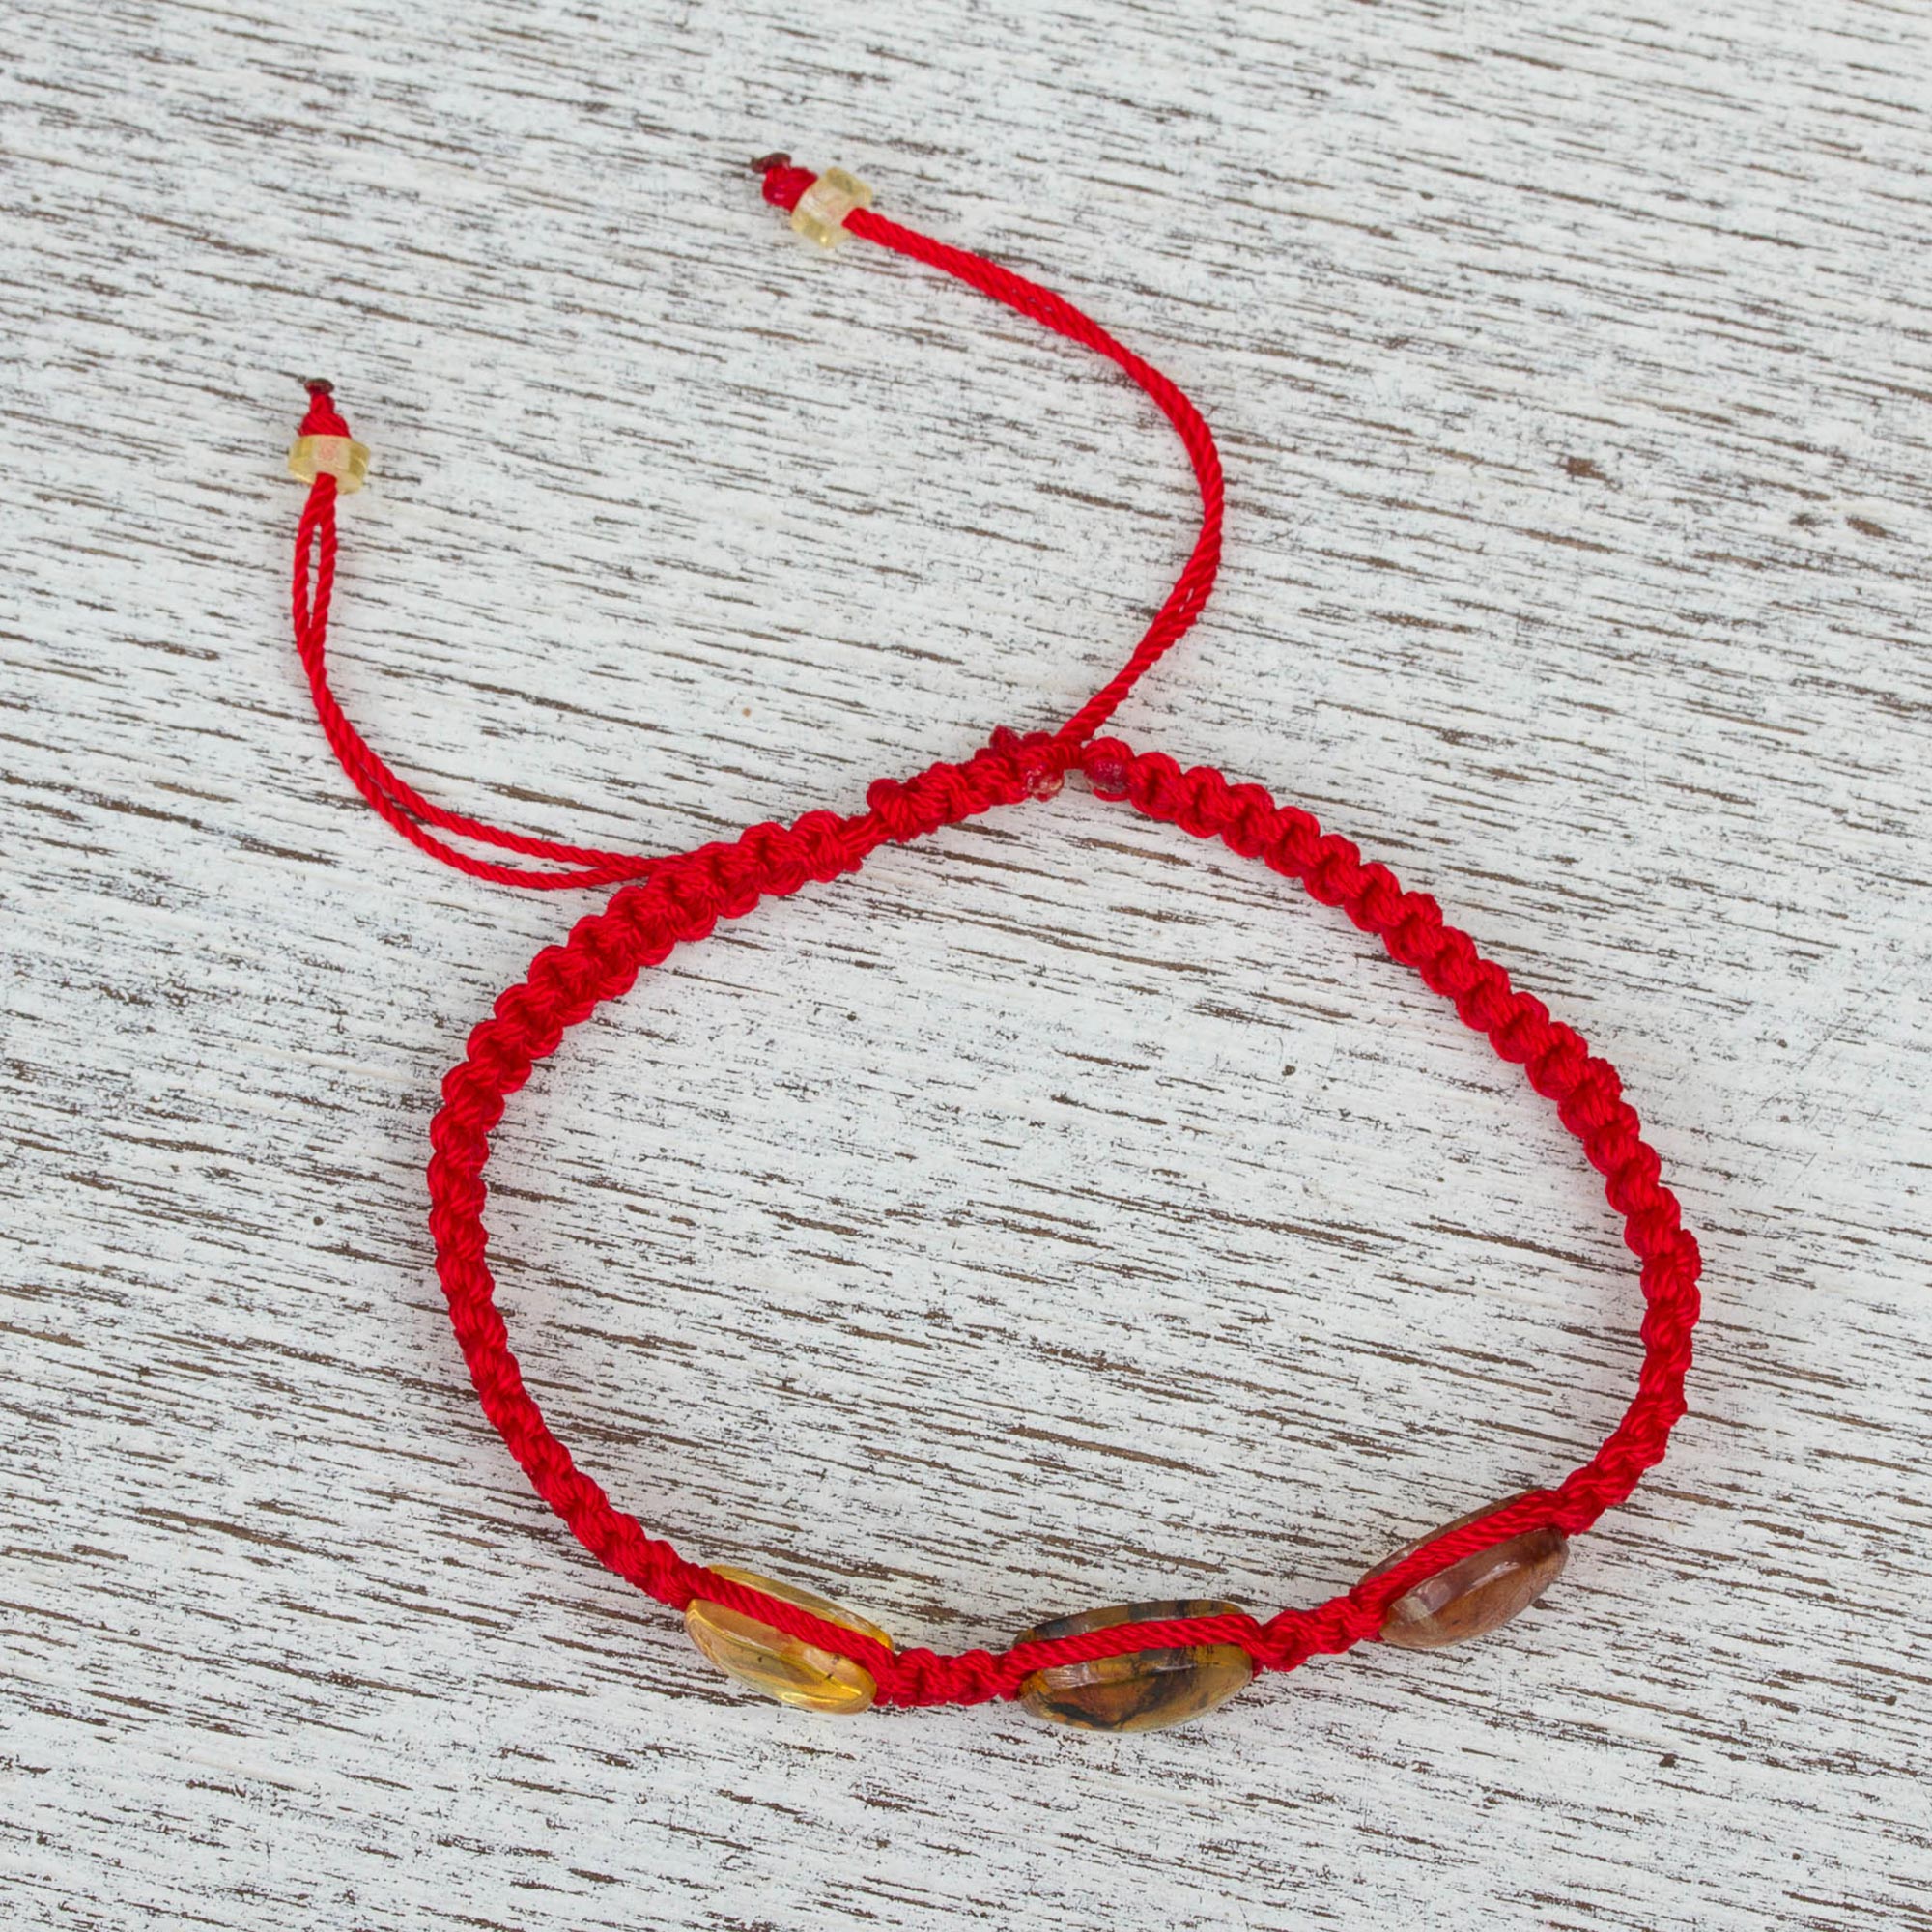 Red Nylon Braided Bracelet with Amber Beads from Mexico - Amber Passion